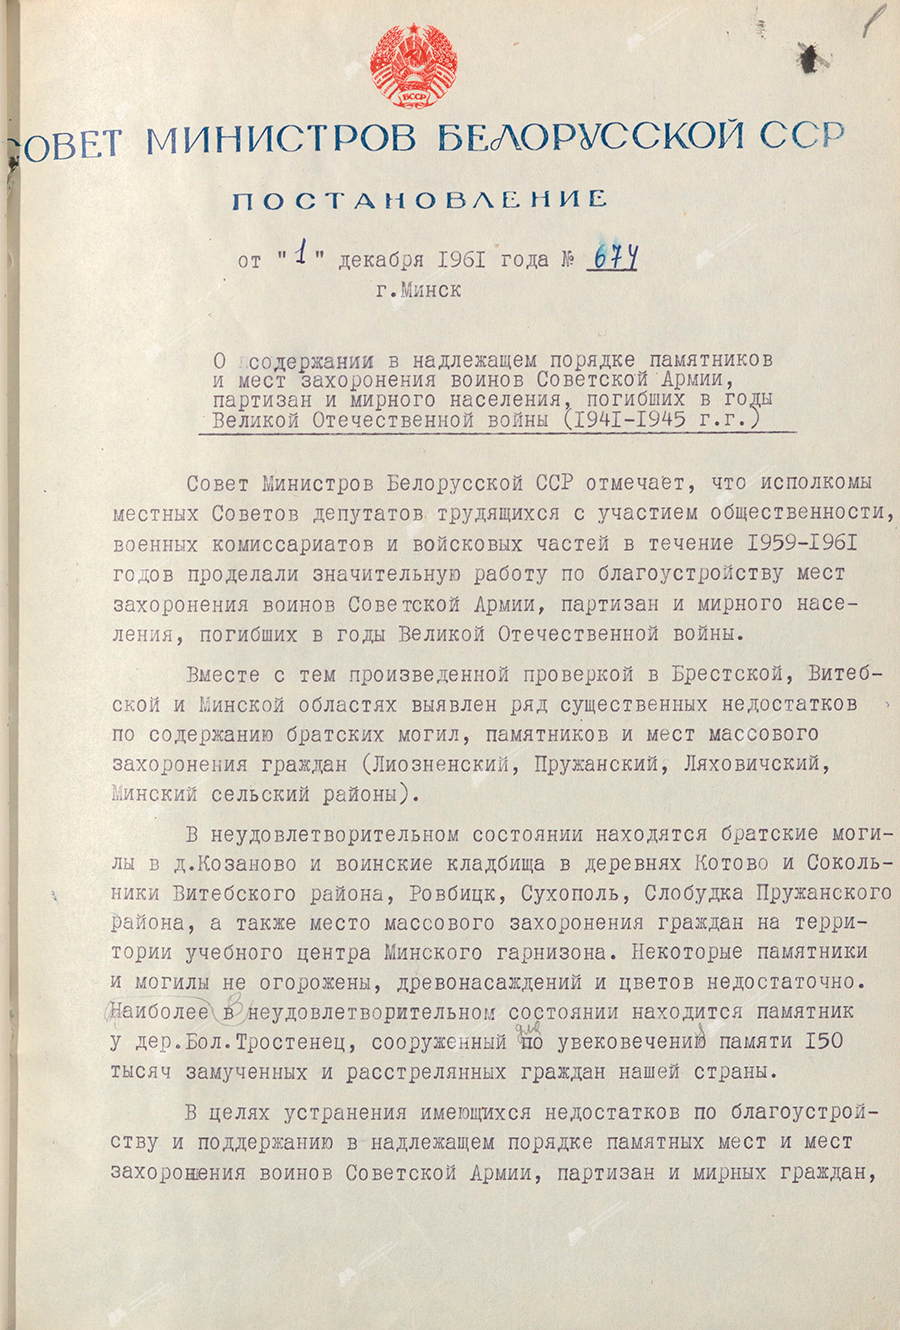 Resolution No. 674 of the Council of Ministers of the BSSR «On the proper maintenance of monuments and burial places of soldiers of the Soviet Army, partisans and civilians who died during the Great Patriotic War (1941 – 1945)»-с. 0